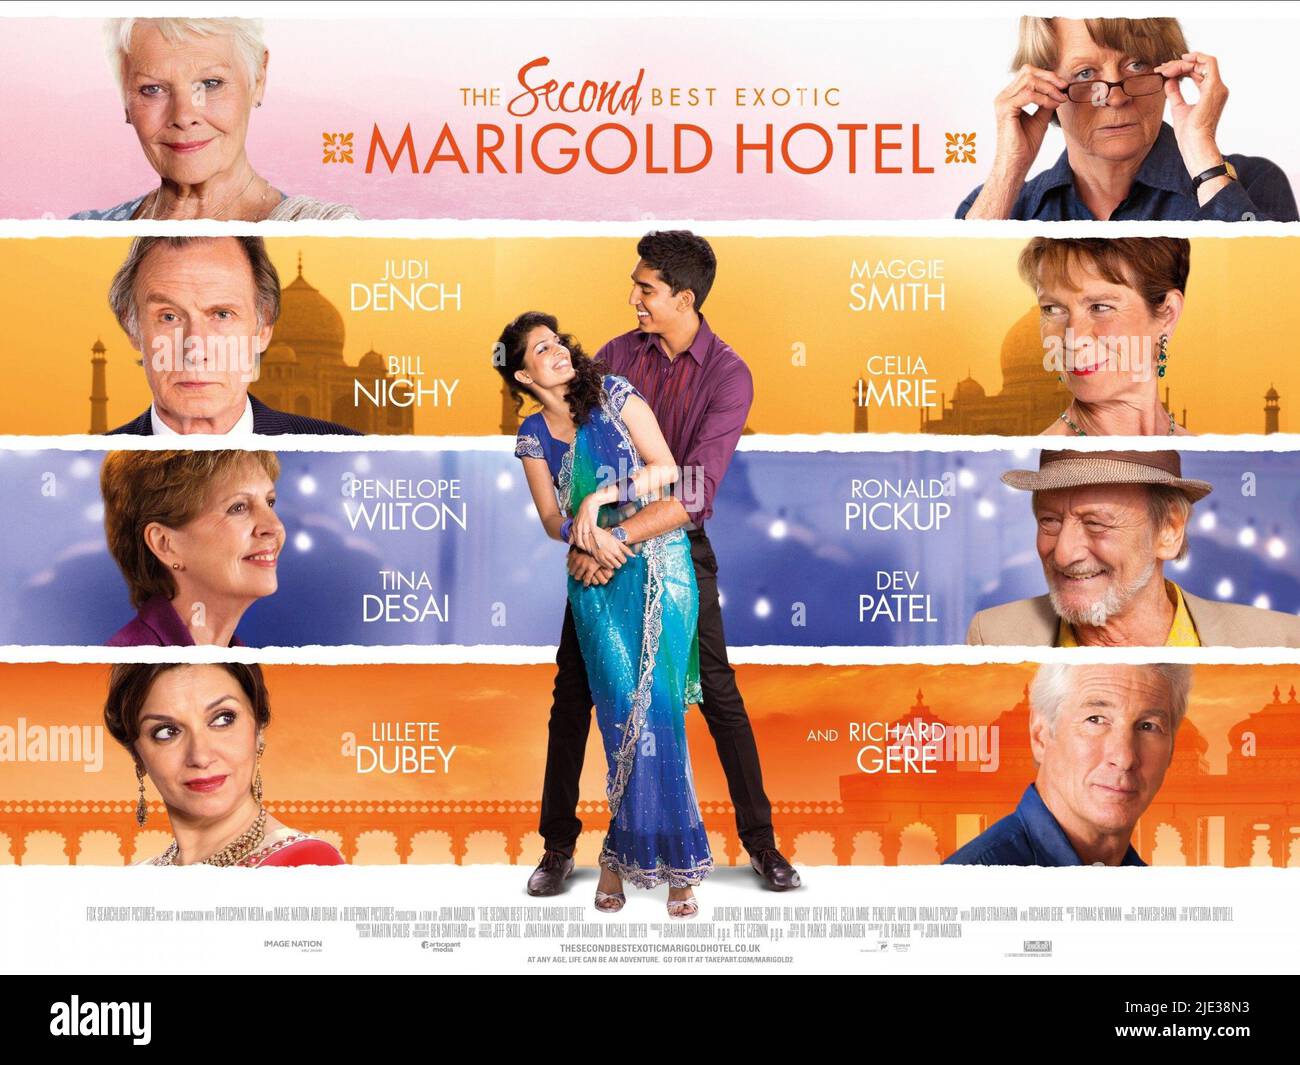 DENCH,SMITH,NIGHY,IMRIE,WILTON,PICKUP,DUBEY,GERE,DESAI,PATEL, THE SECOND BEST EXOTIC MARIGOLD HOTEL, 2015 Stock Photo